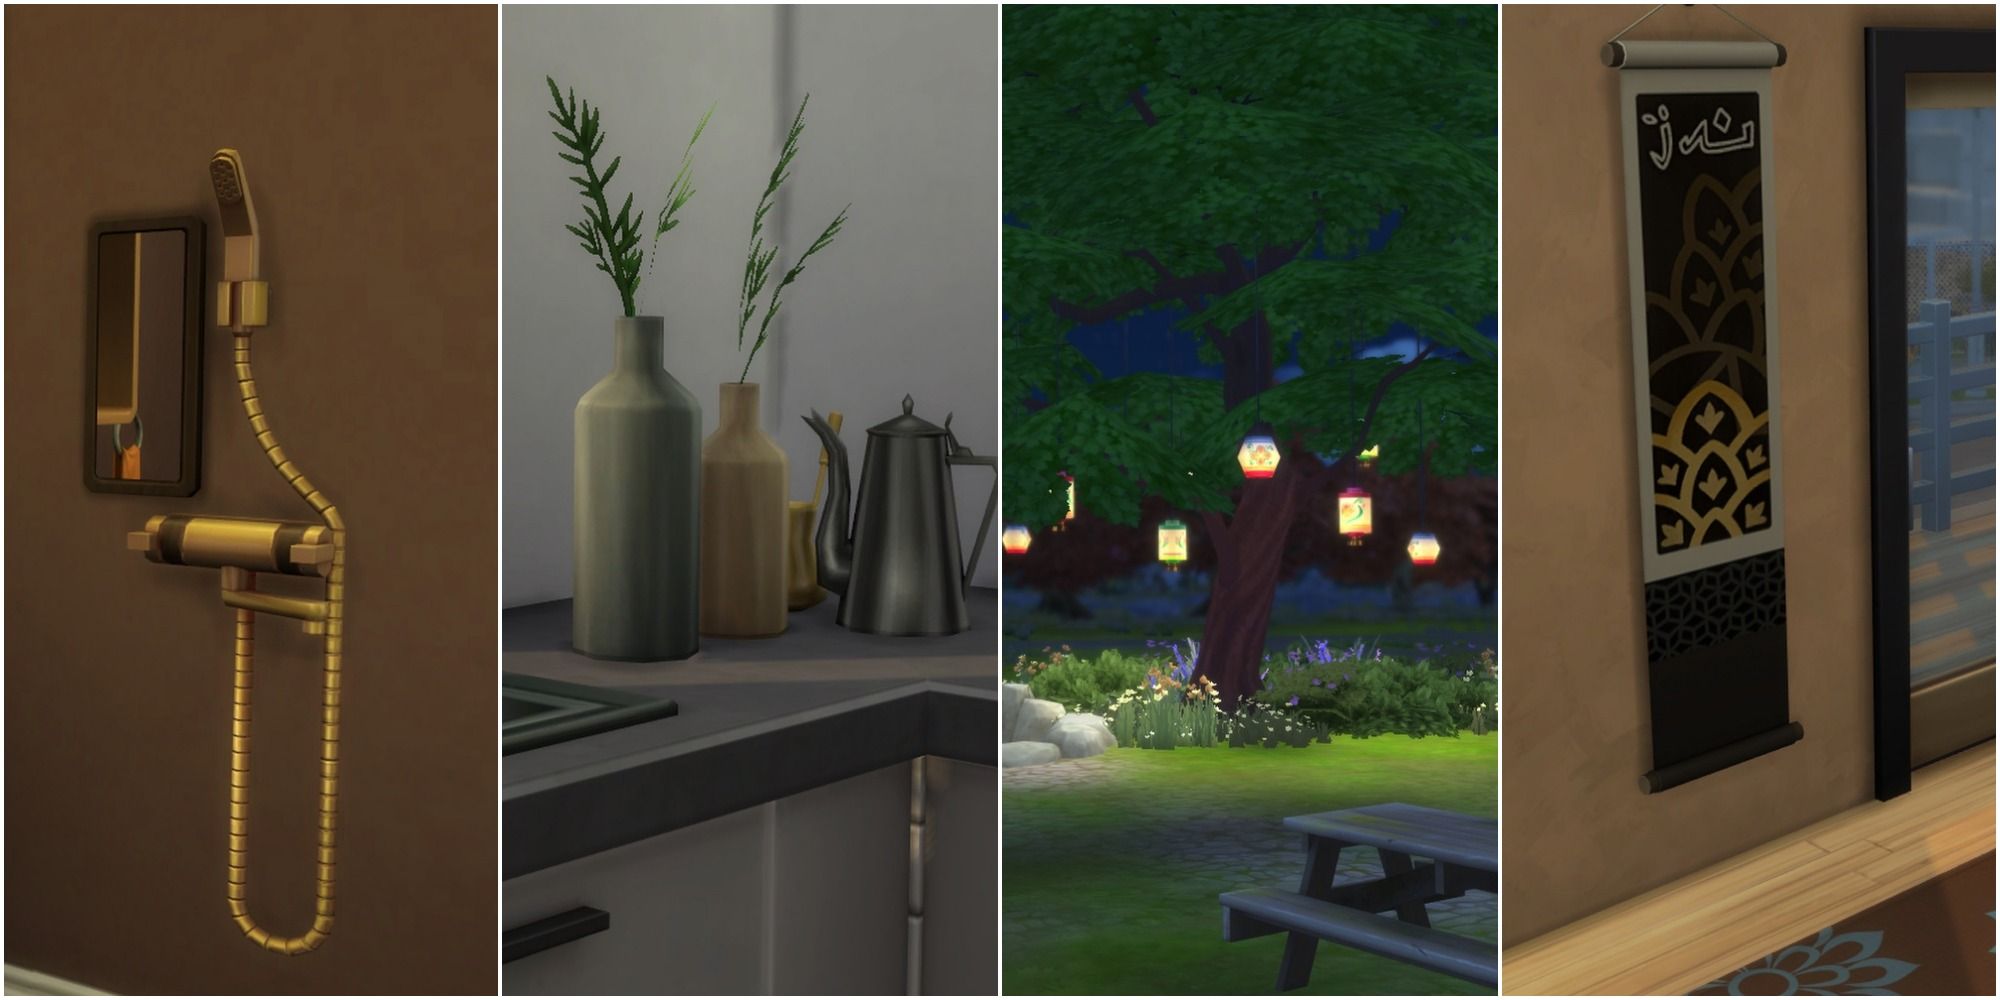 A brass shower, decorative bottles, a tree with lanterns, and a wall banner in The Sims 4.